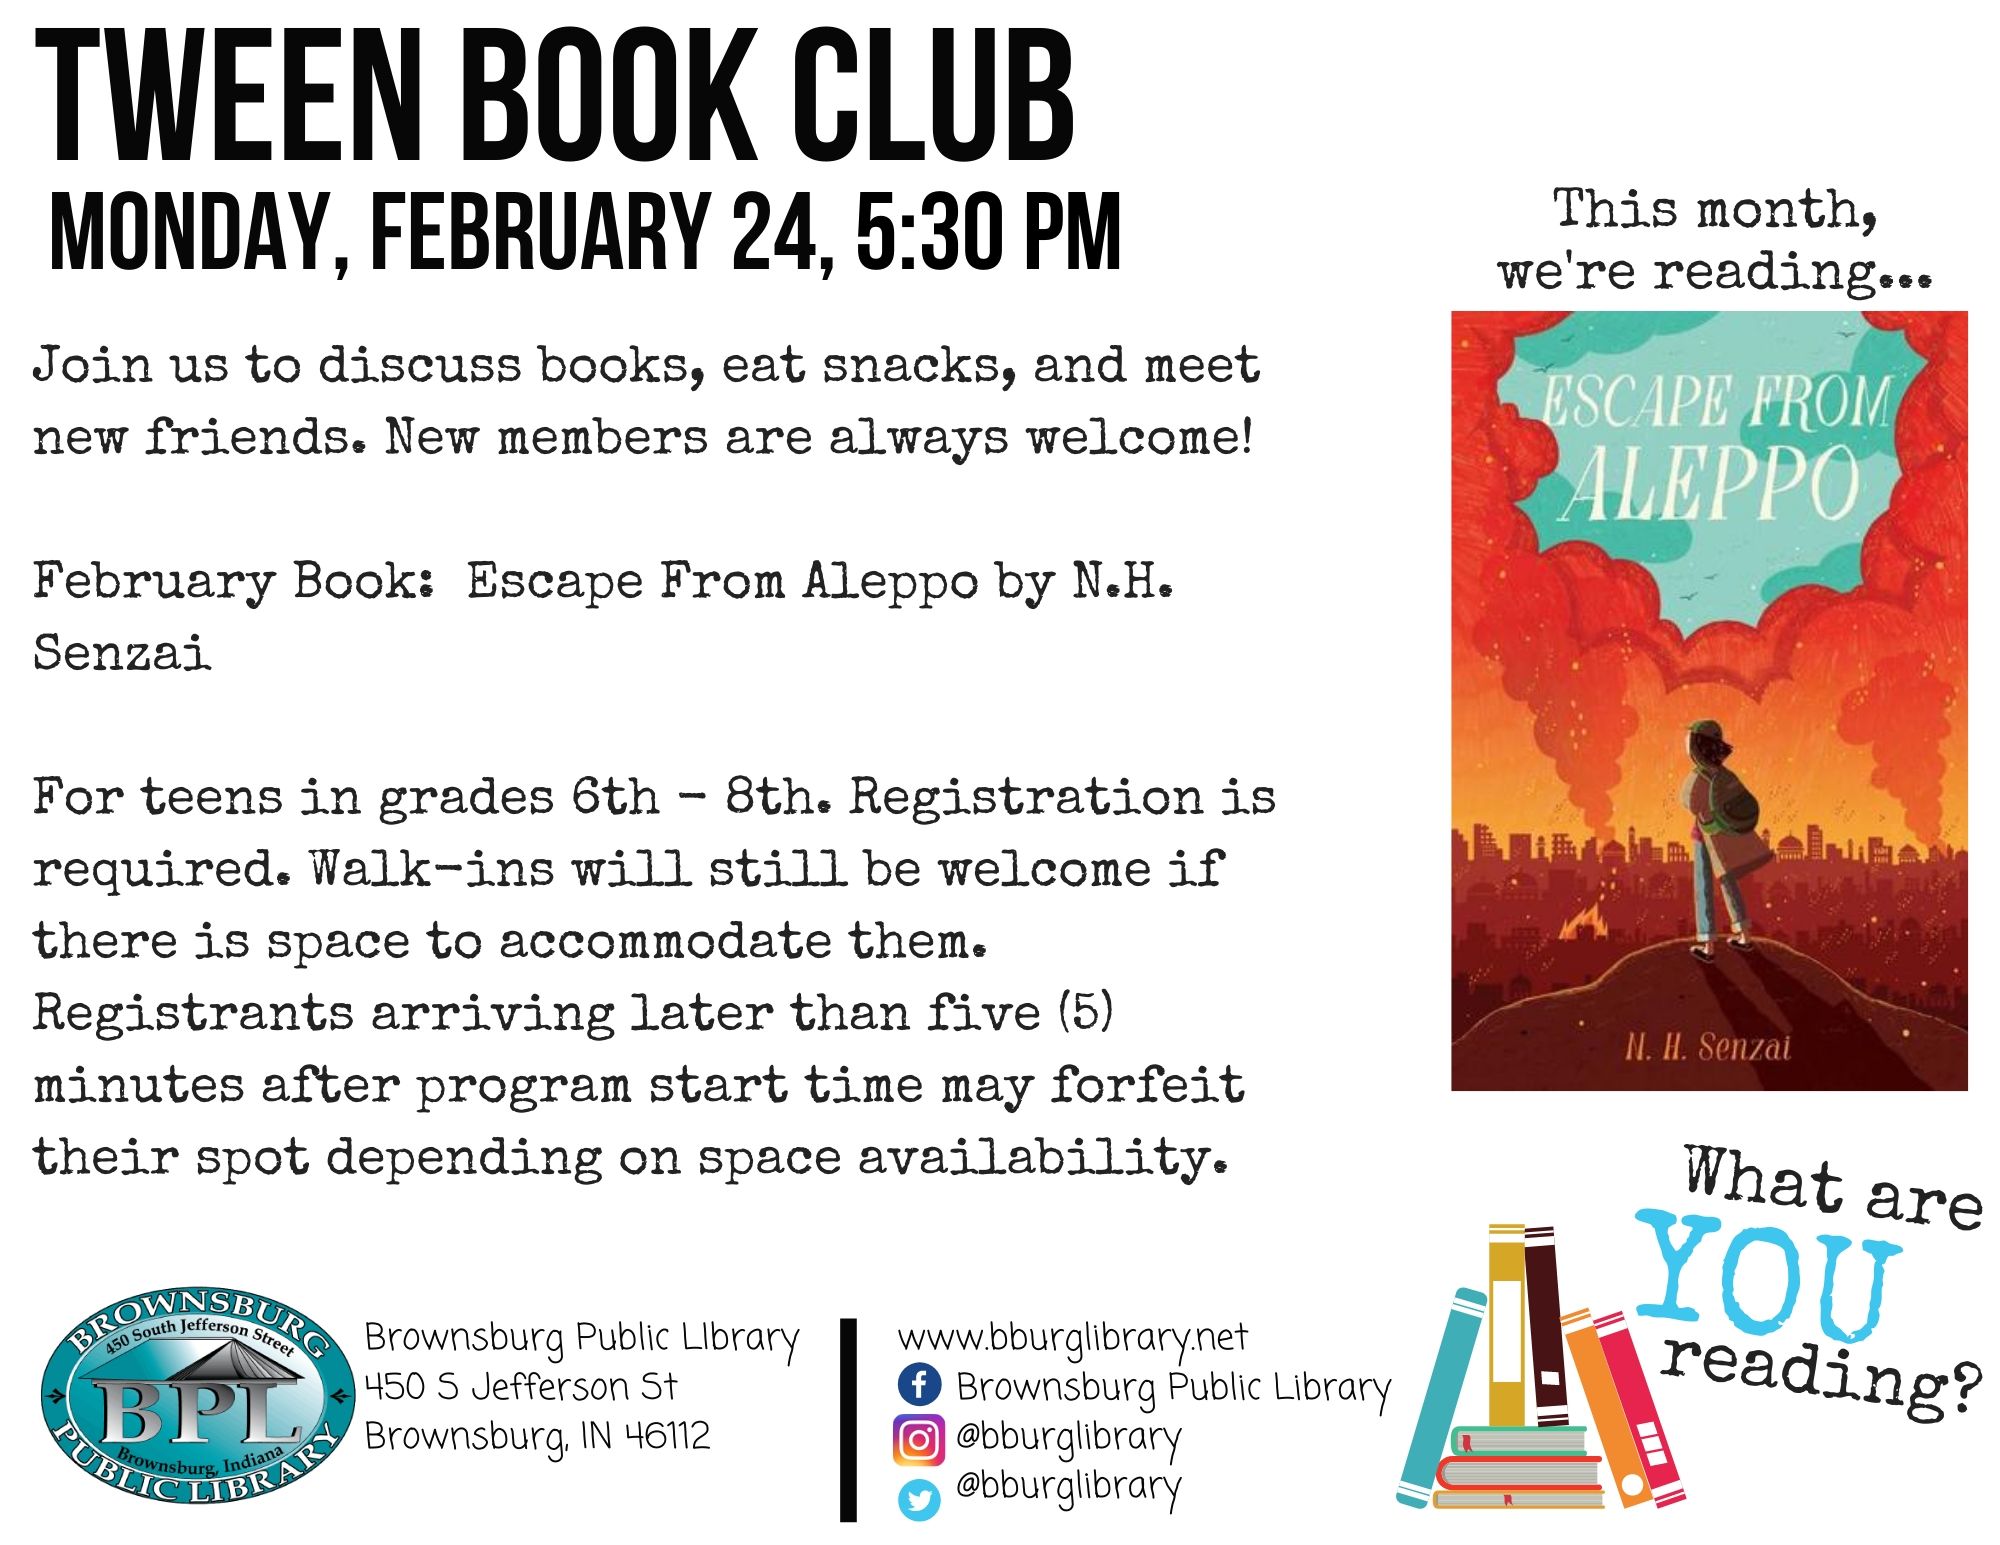 Tween Book Club Escape From Aleppo February 24th at 5:30